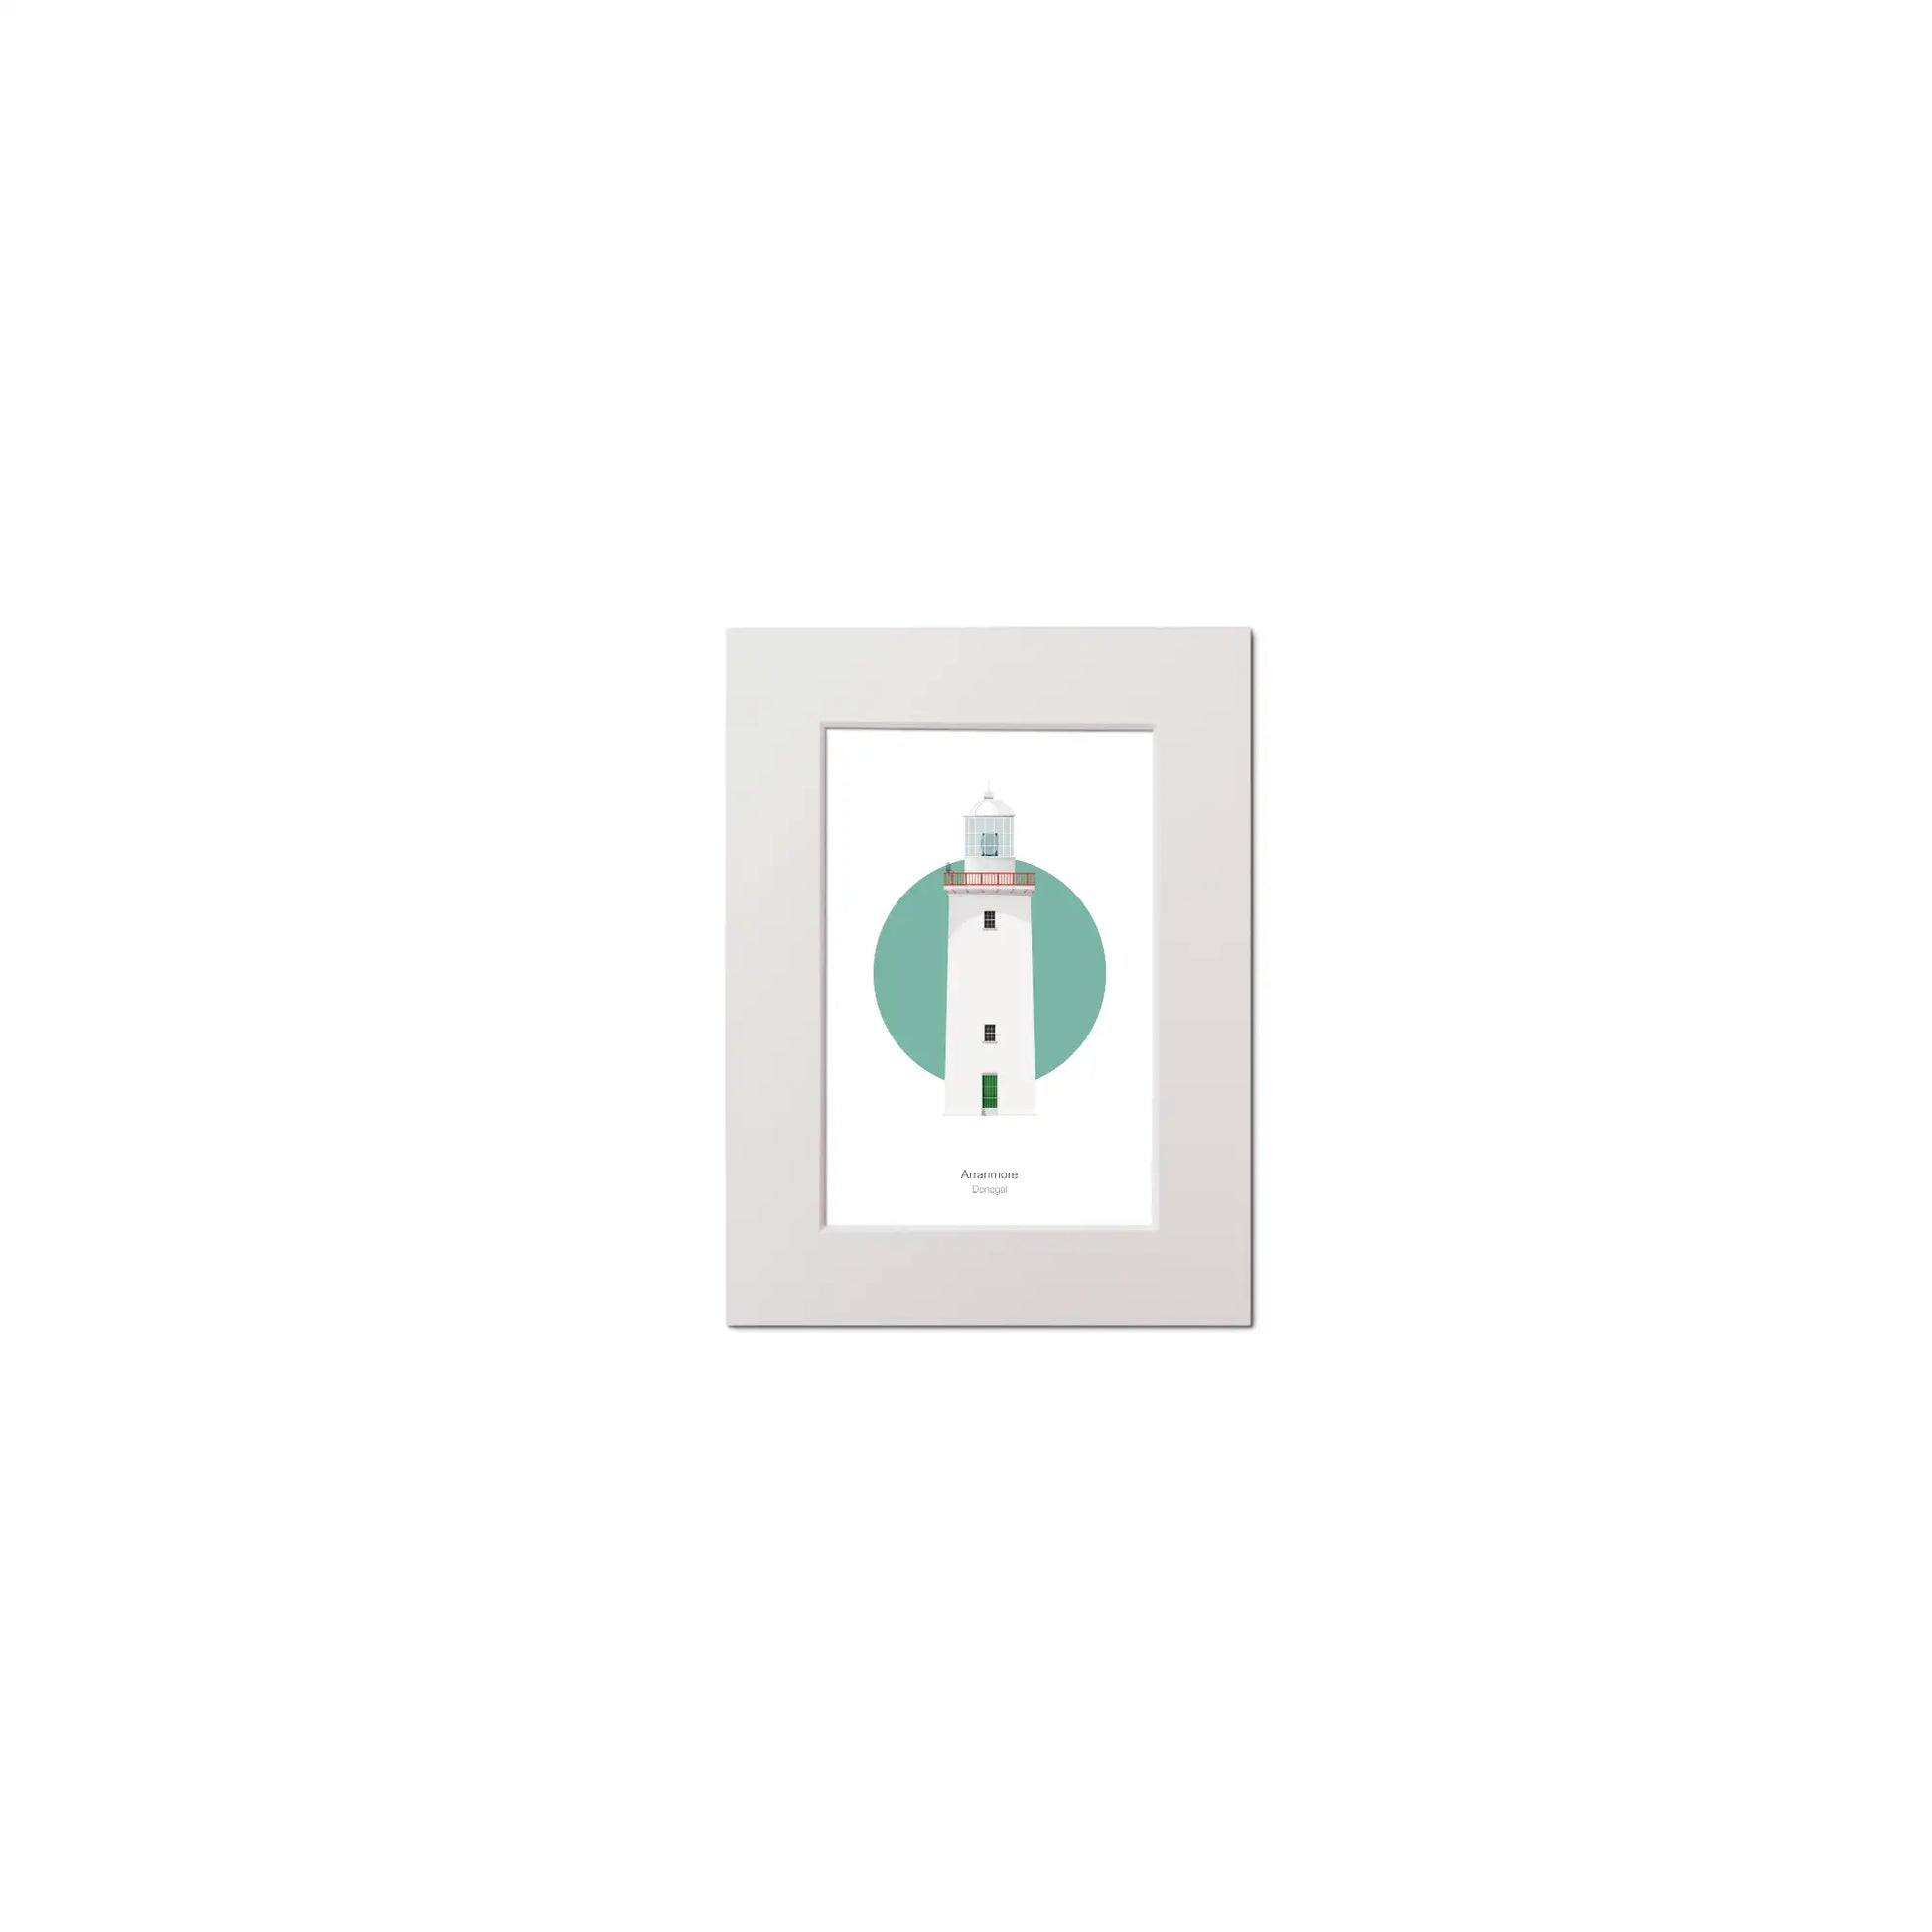 Illustration of Arranmore lighthouse on a white background inside light blue square, mounted and measuring 15x20cm.